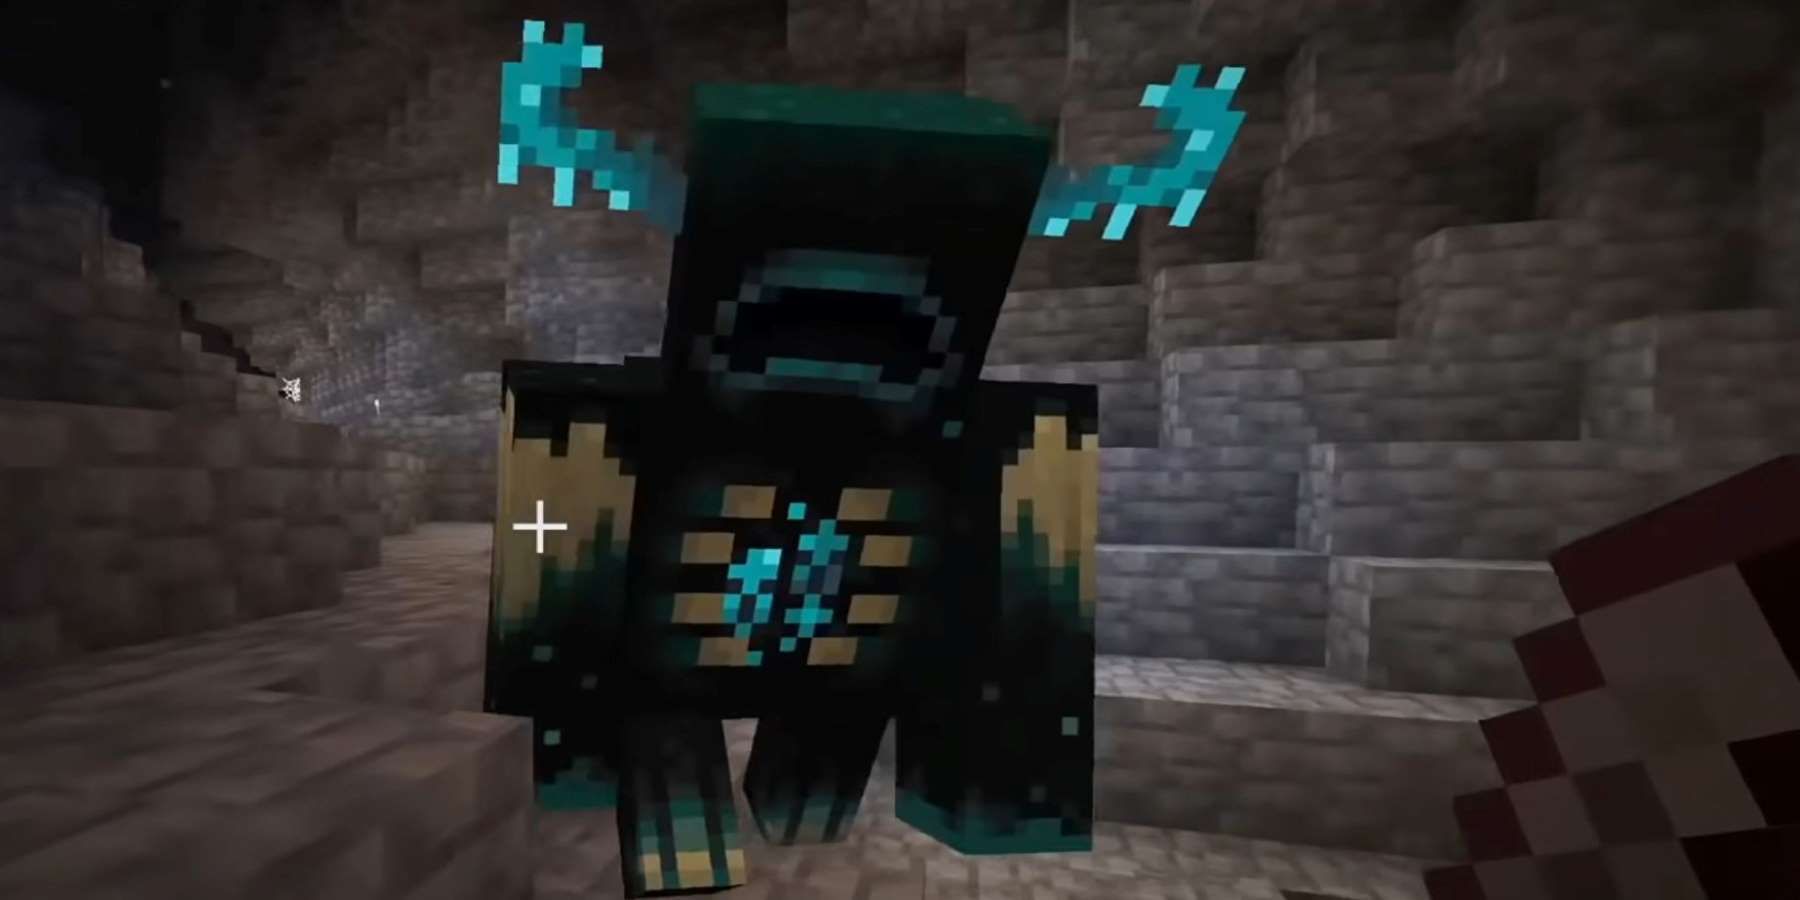 A Warden advancing on a Minecraft player in a narrow cavern